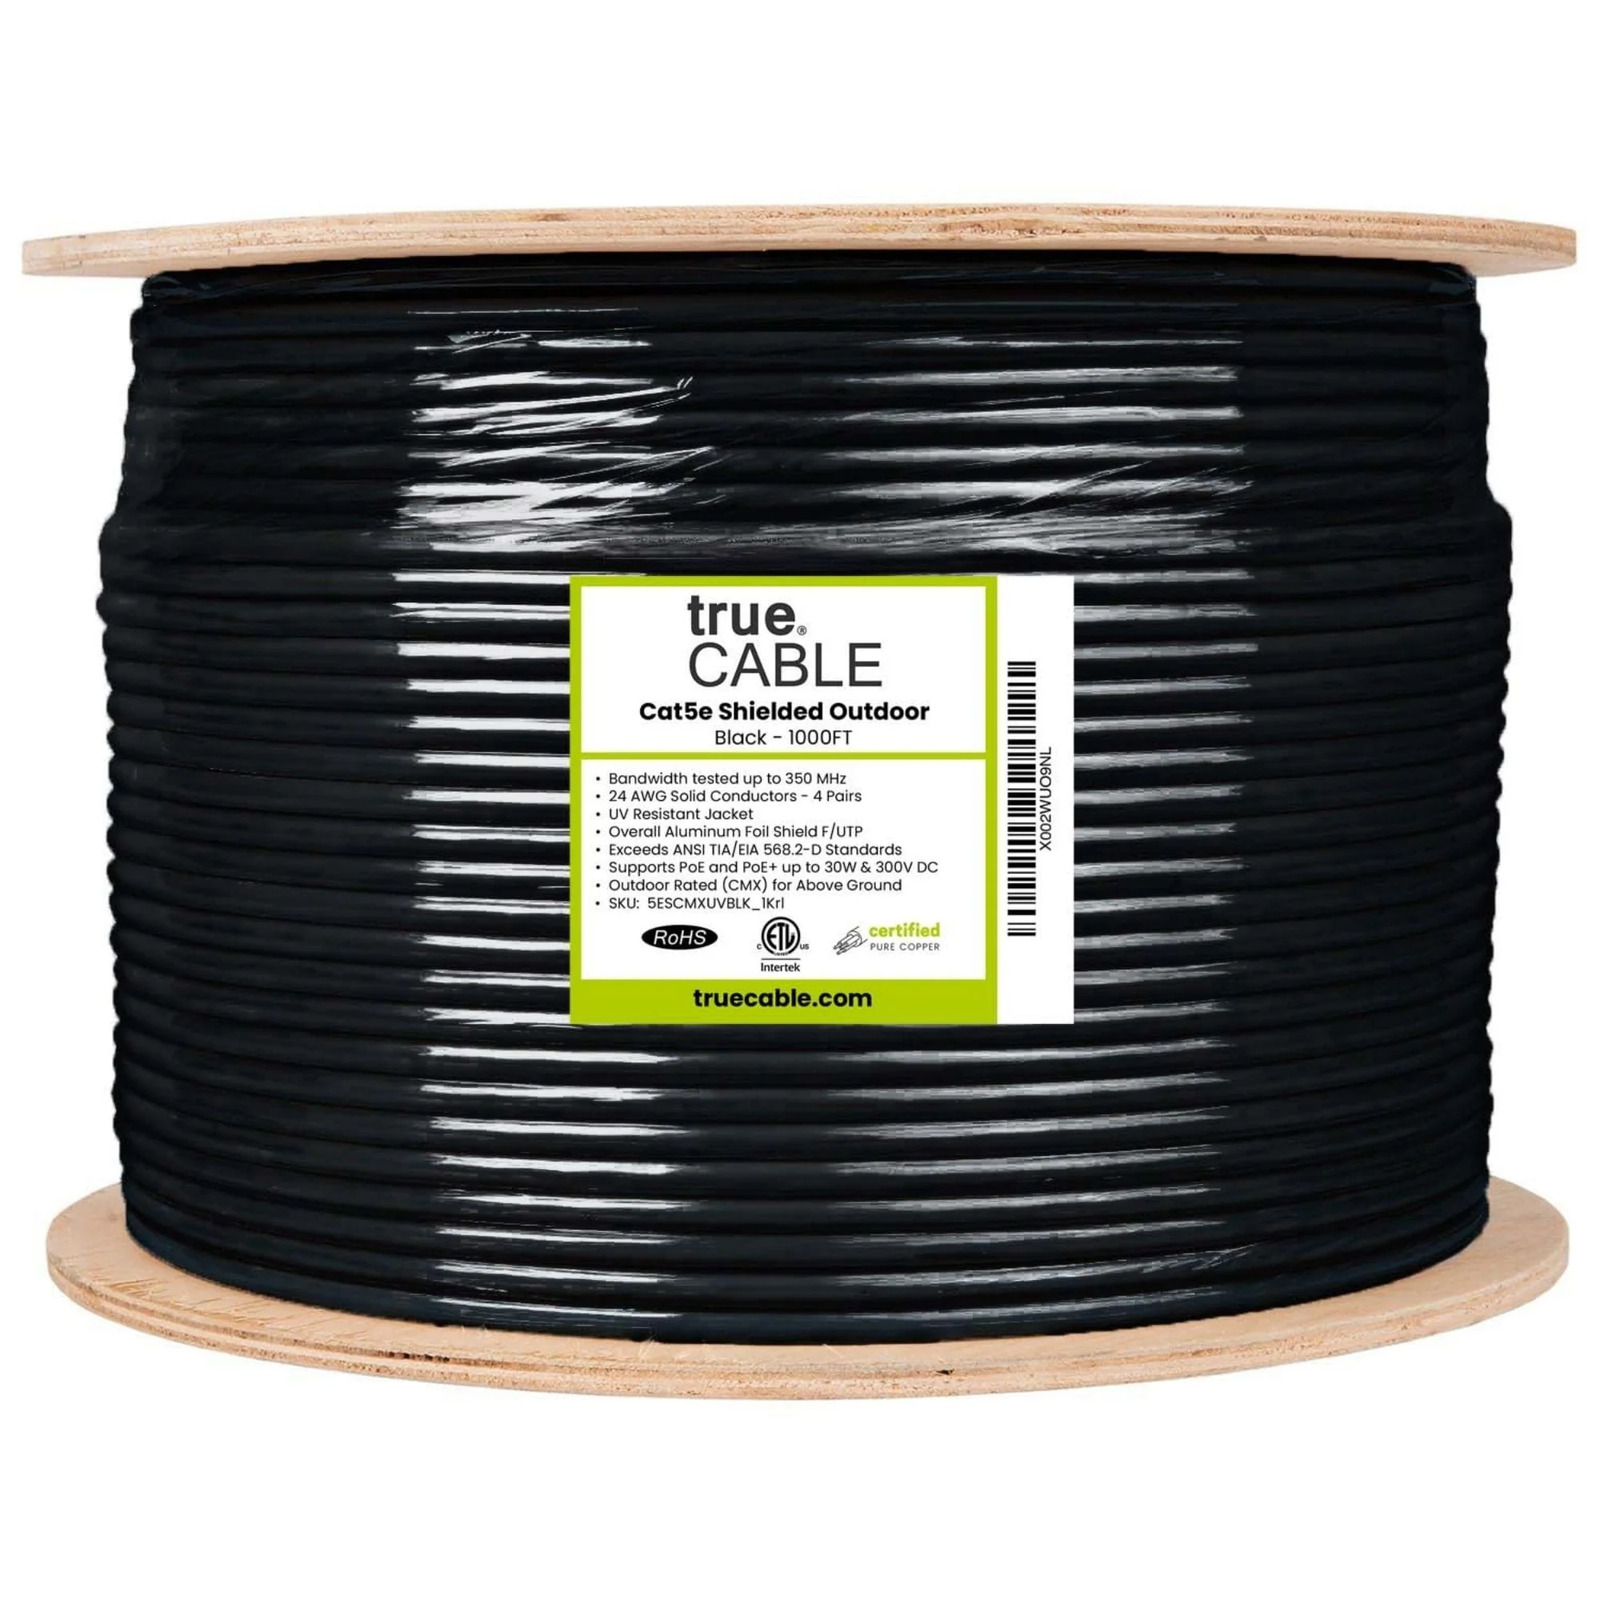 trueCABLE Cat5e Outdoor｜Shielded